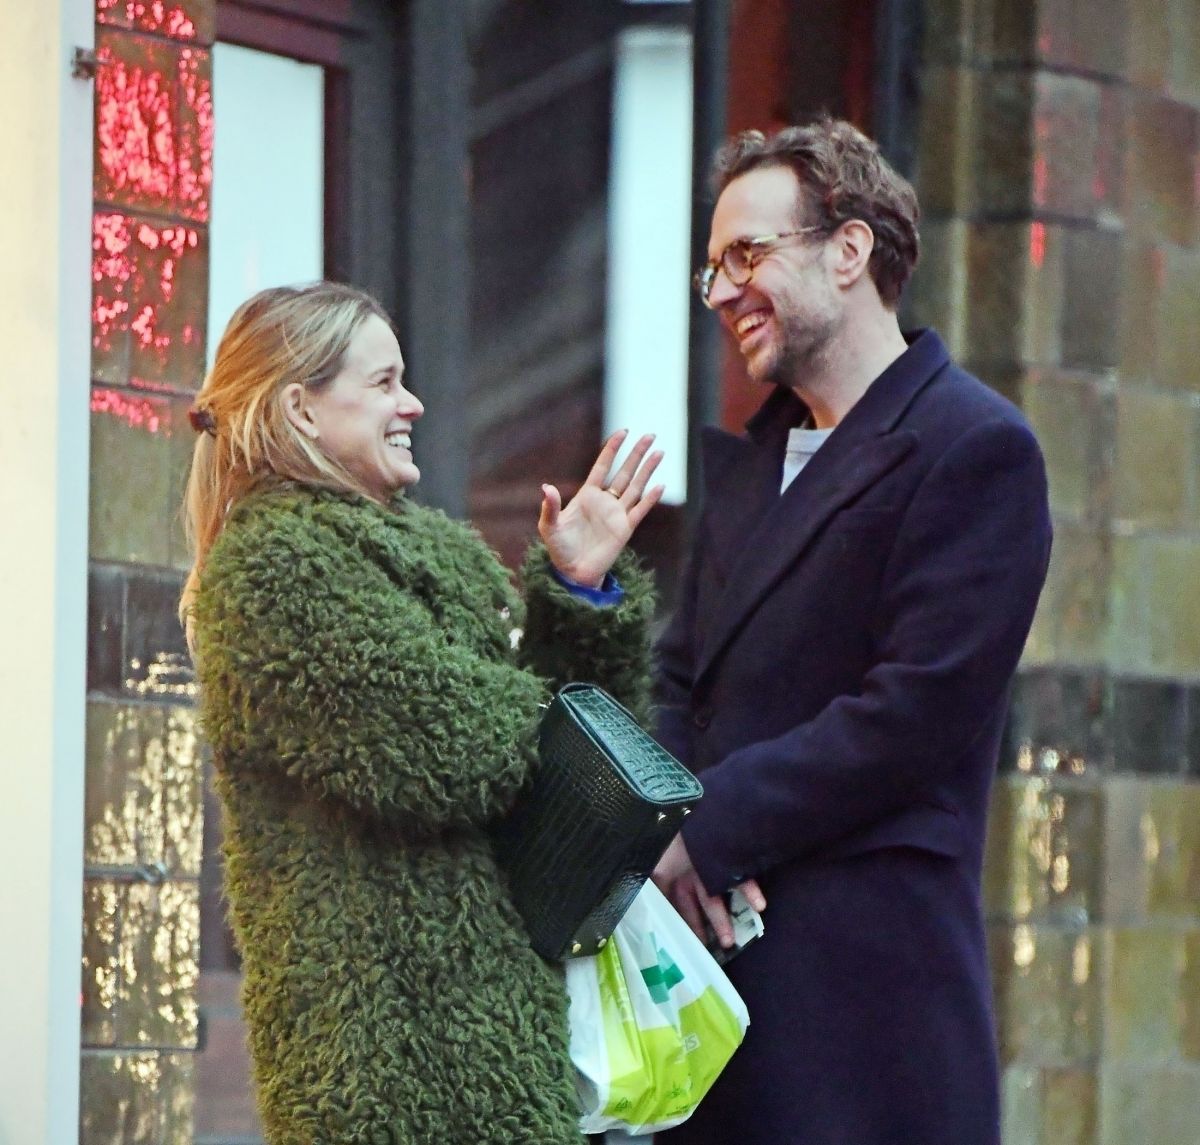 Alice Eve And Rafe Spall Out London